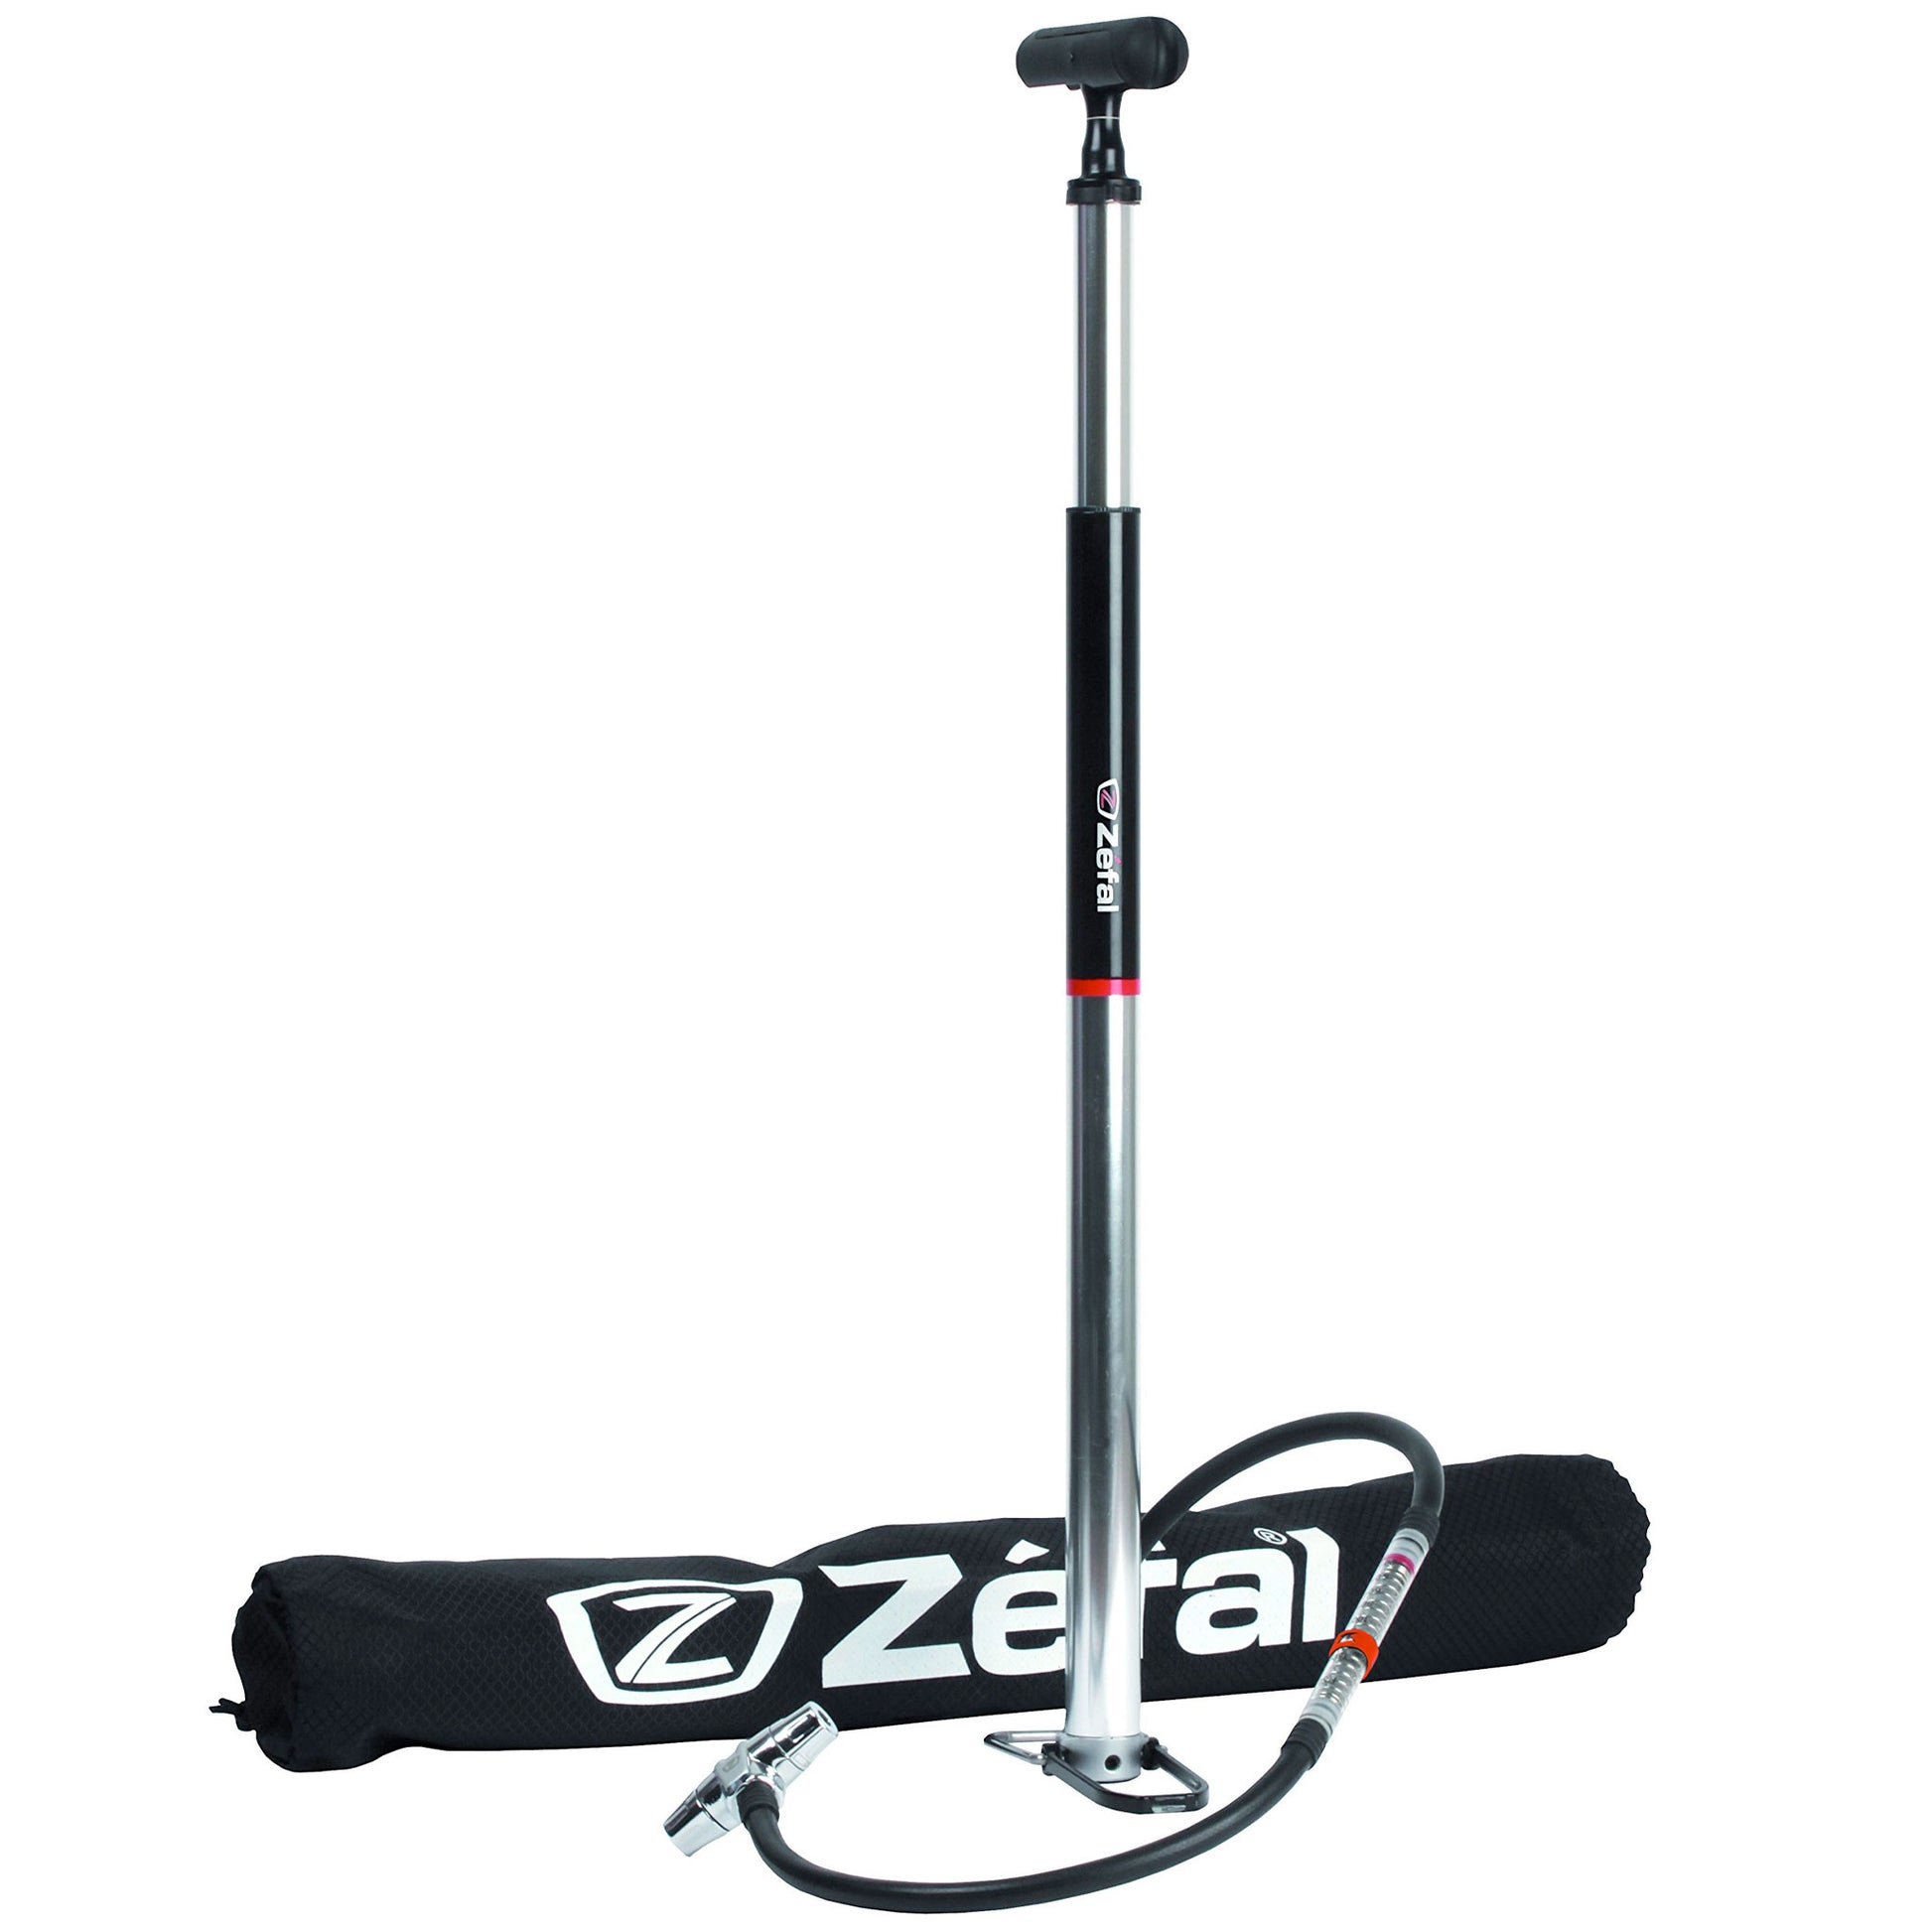 Zefal Profil Travel Floor Pump - Silver buy online at Woolys Wheels with free delivery